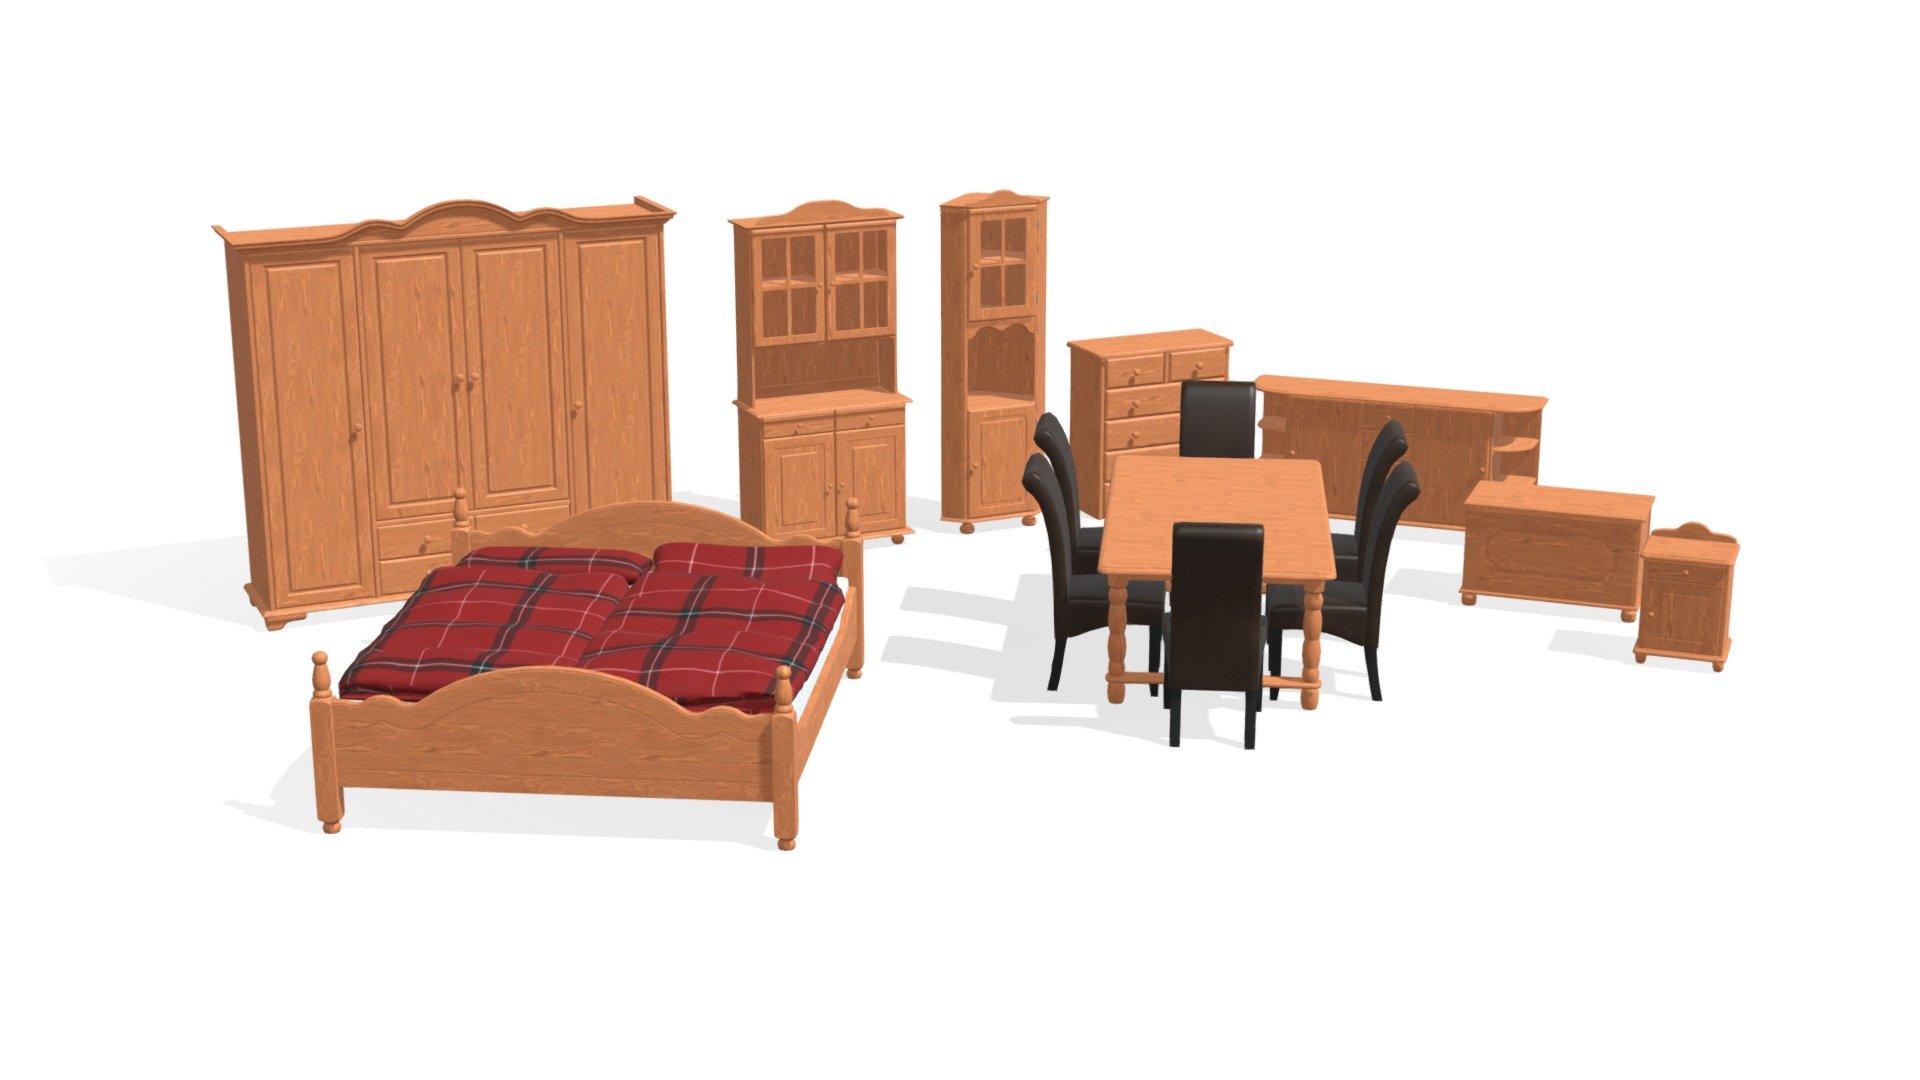 Wood Furniture Pack

This model pack includes ten pieces of furniture of the same style and made from the same wood. These dressers and cupboards can make your 3D living room a cozy place, give your hallways character, or add flair to your dining room.

Pack includes:


Bed
Chair
Chest/ bed chest
Clothes dresser
Corner cupboard
Cupboard
Decorative dresser
Dining table

All models in this pack are subdivision-ready! This means that the different meshes are made in such a way that allows you to subdivide (or &lsquo;smooth') the model without any glitches. This lets you easily increase the quality of the models.

Note: Some of the pieces of furniture in this pack are non-manifold objects. This means, that some faces that are obsolete aren't modeled. This means, that you will have to tweak your subdivision-surface/ smooth modifiers and set them to a &lsquo;keep corners' mode.

Contains assets from ambientCG, licensed under CC0 1.0 Universal 3d model